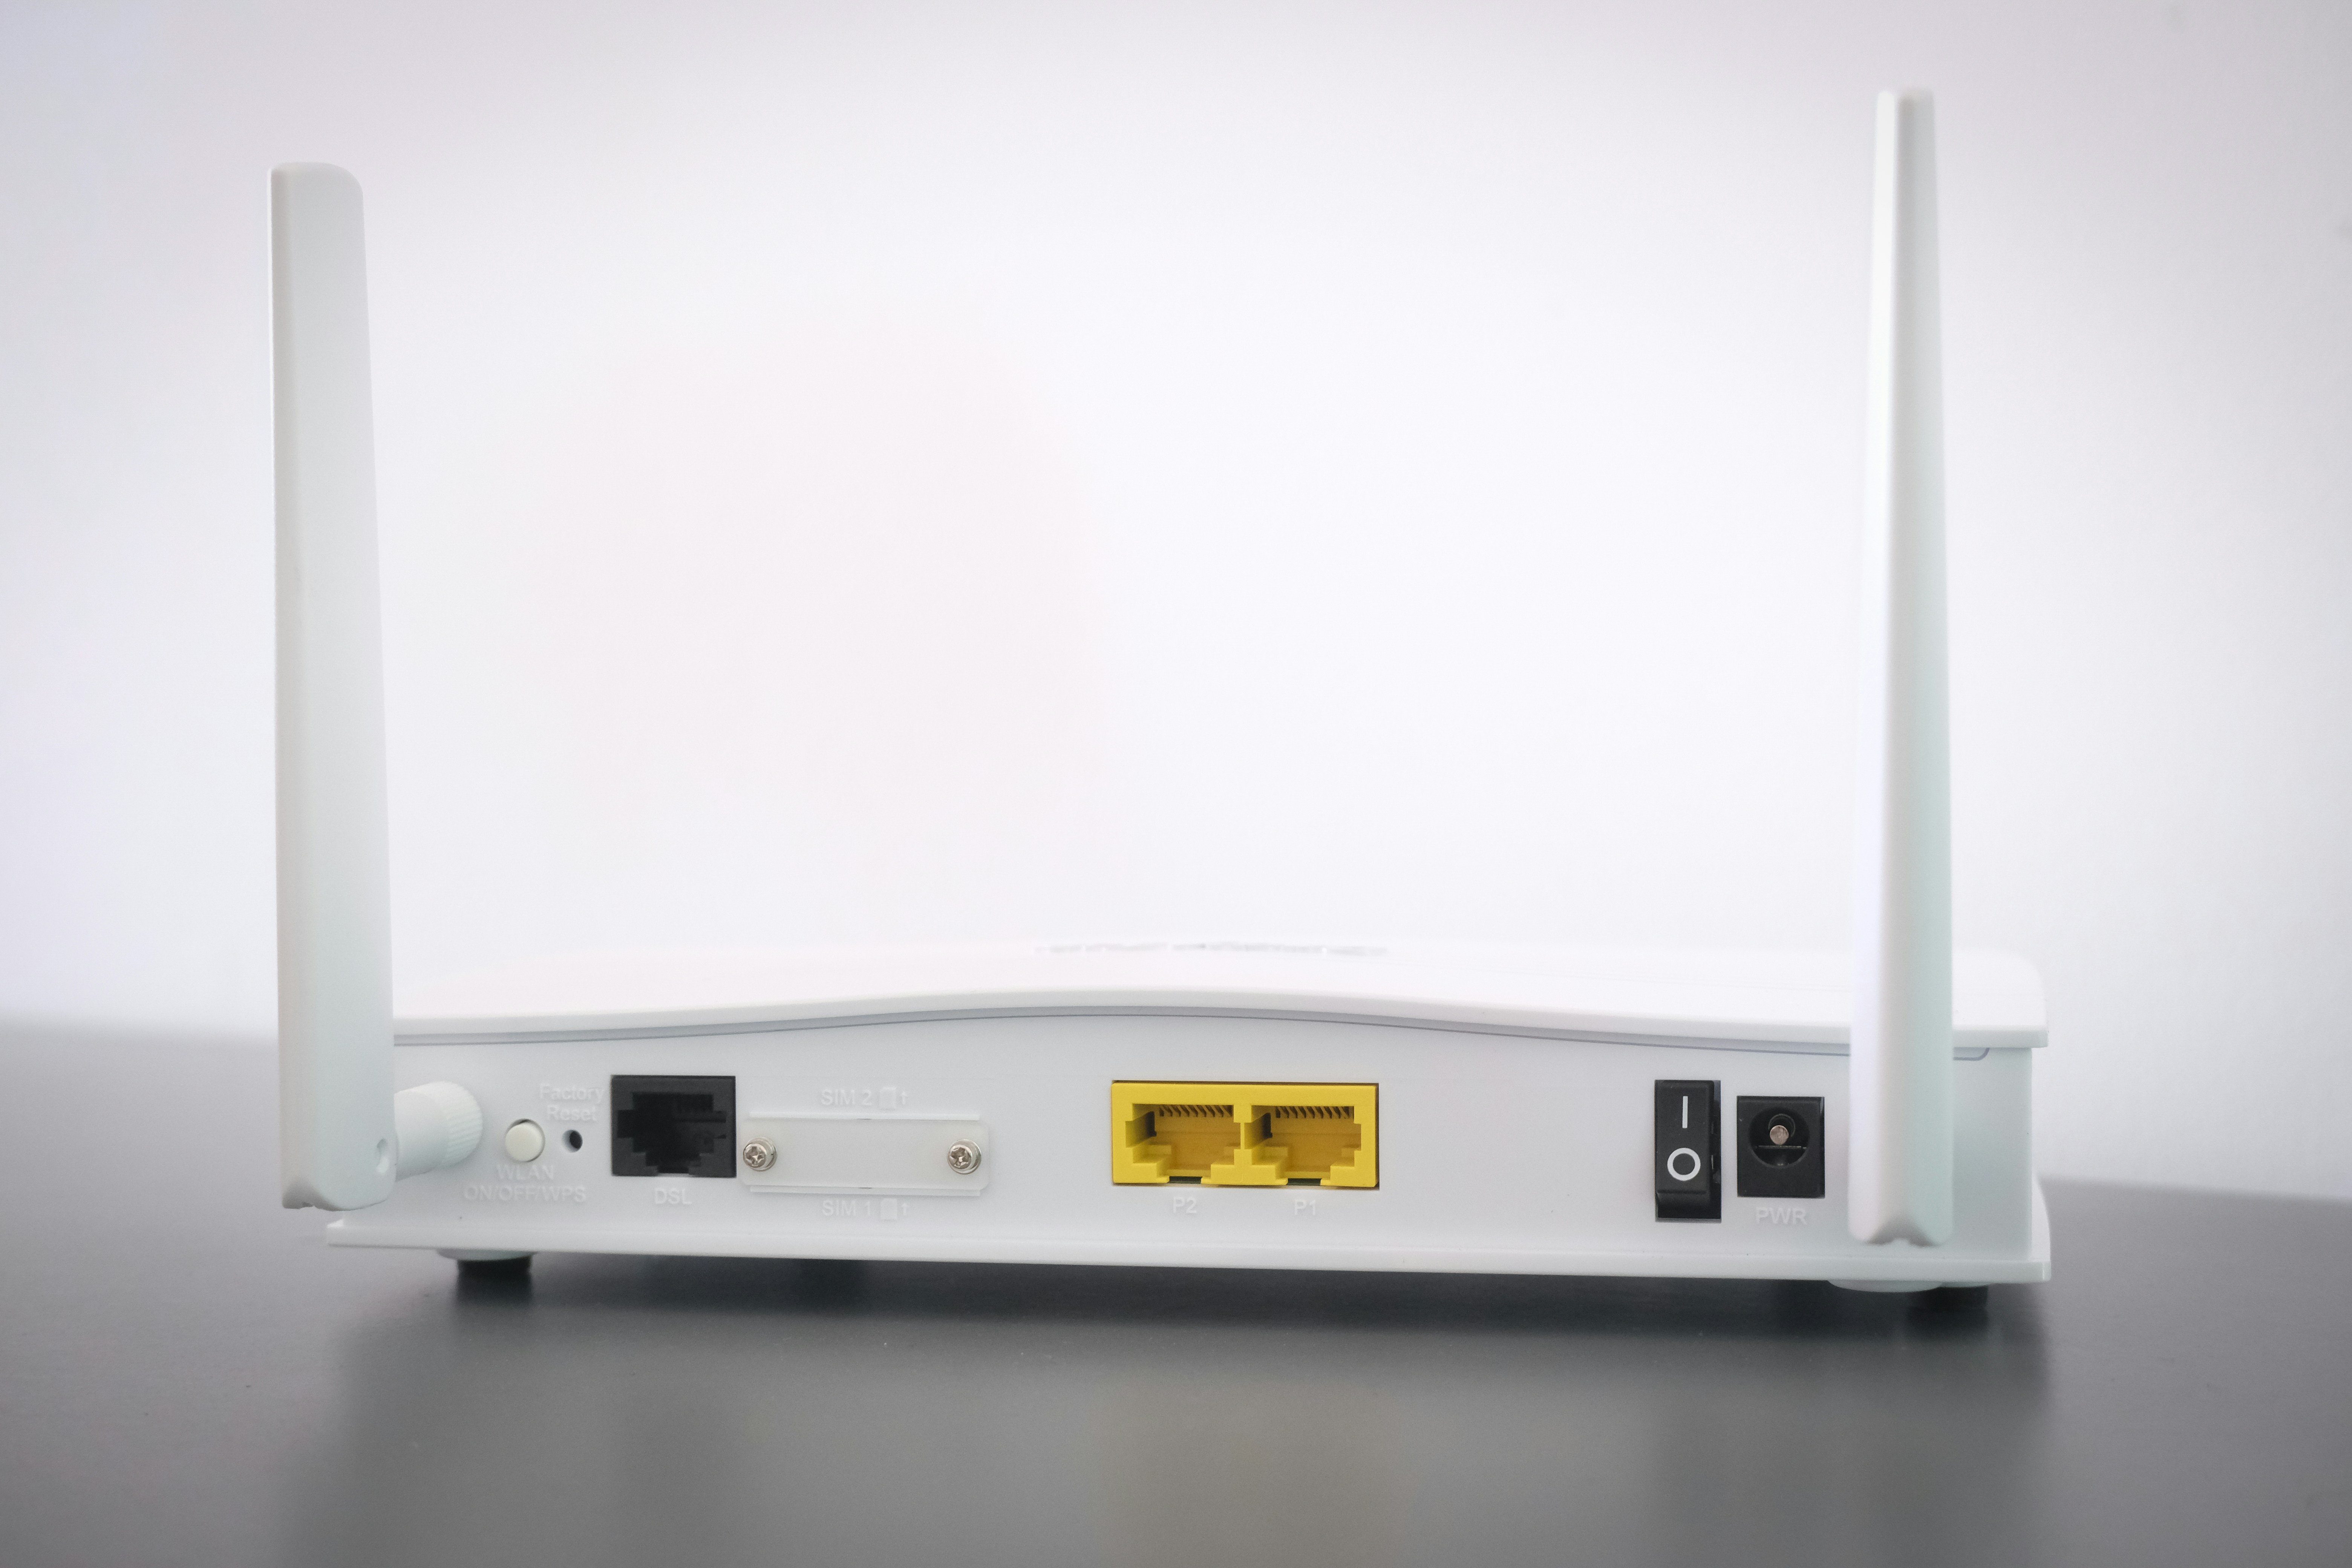 Rear view of Draytek Vigor showing dsl and ethernet ports as well as power and on off button.